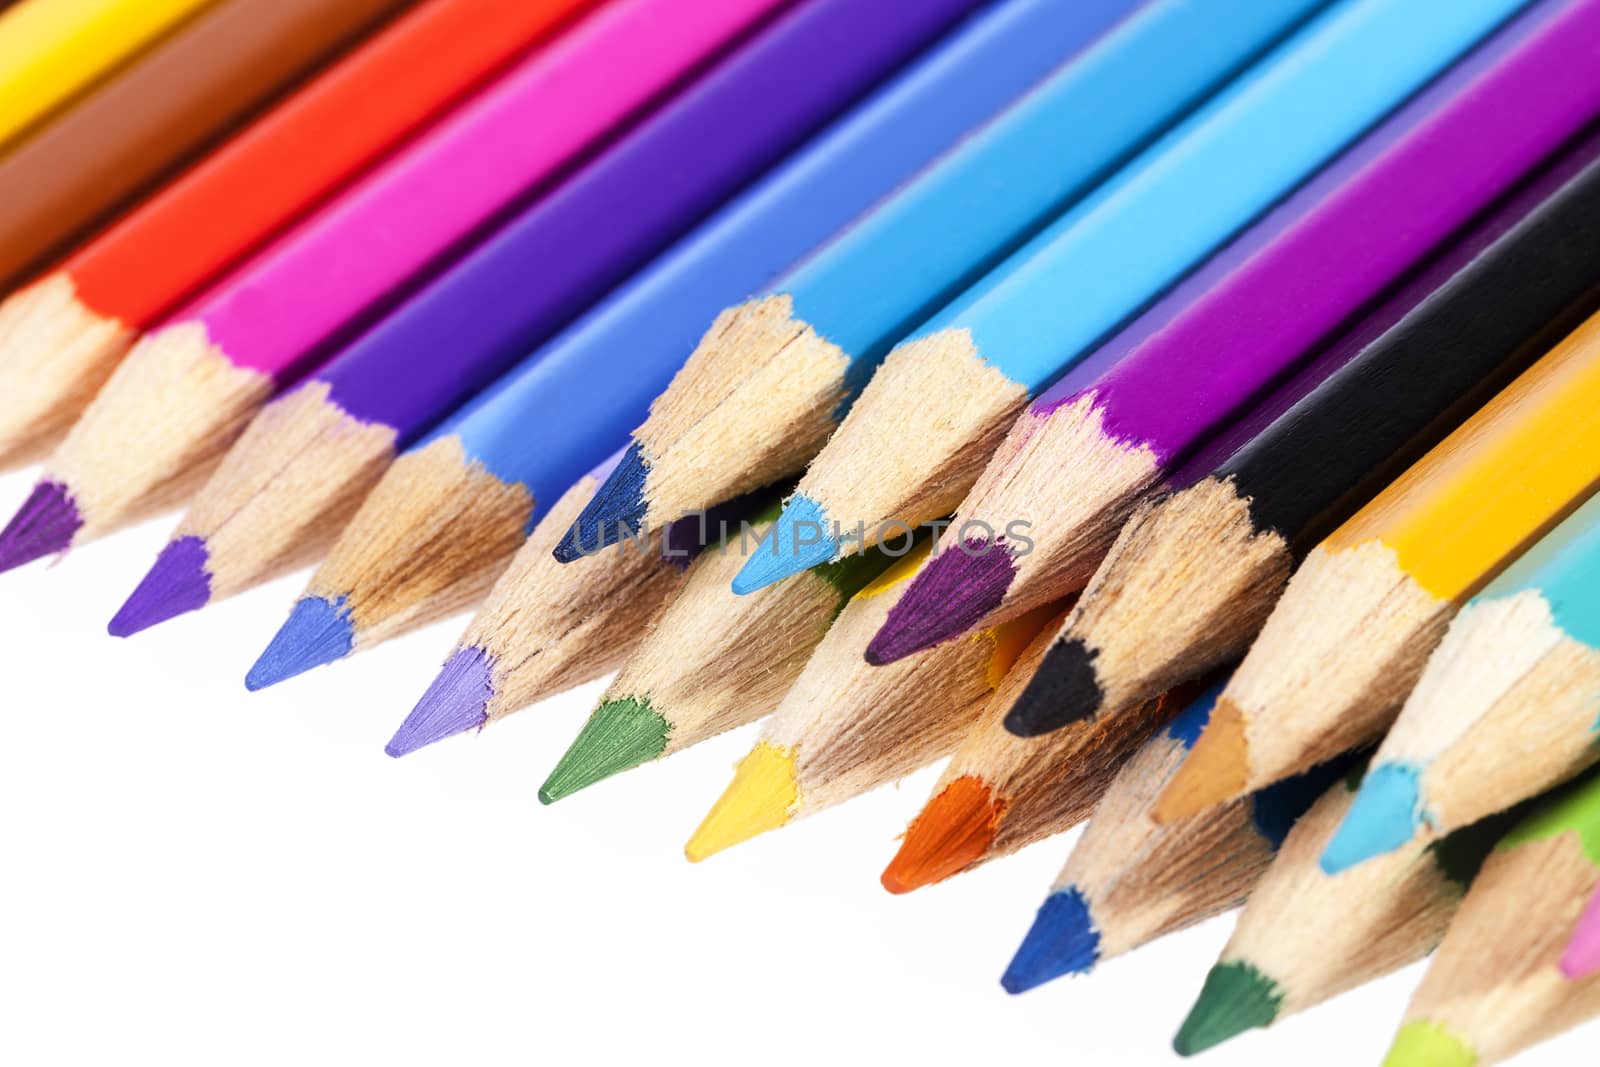 Chipped colored crayons on white background, close up by mychadre77